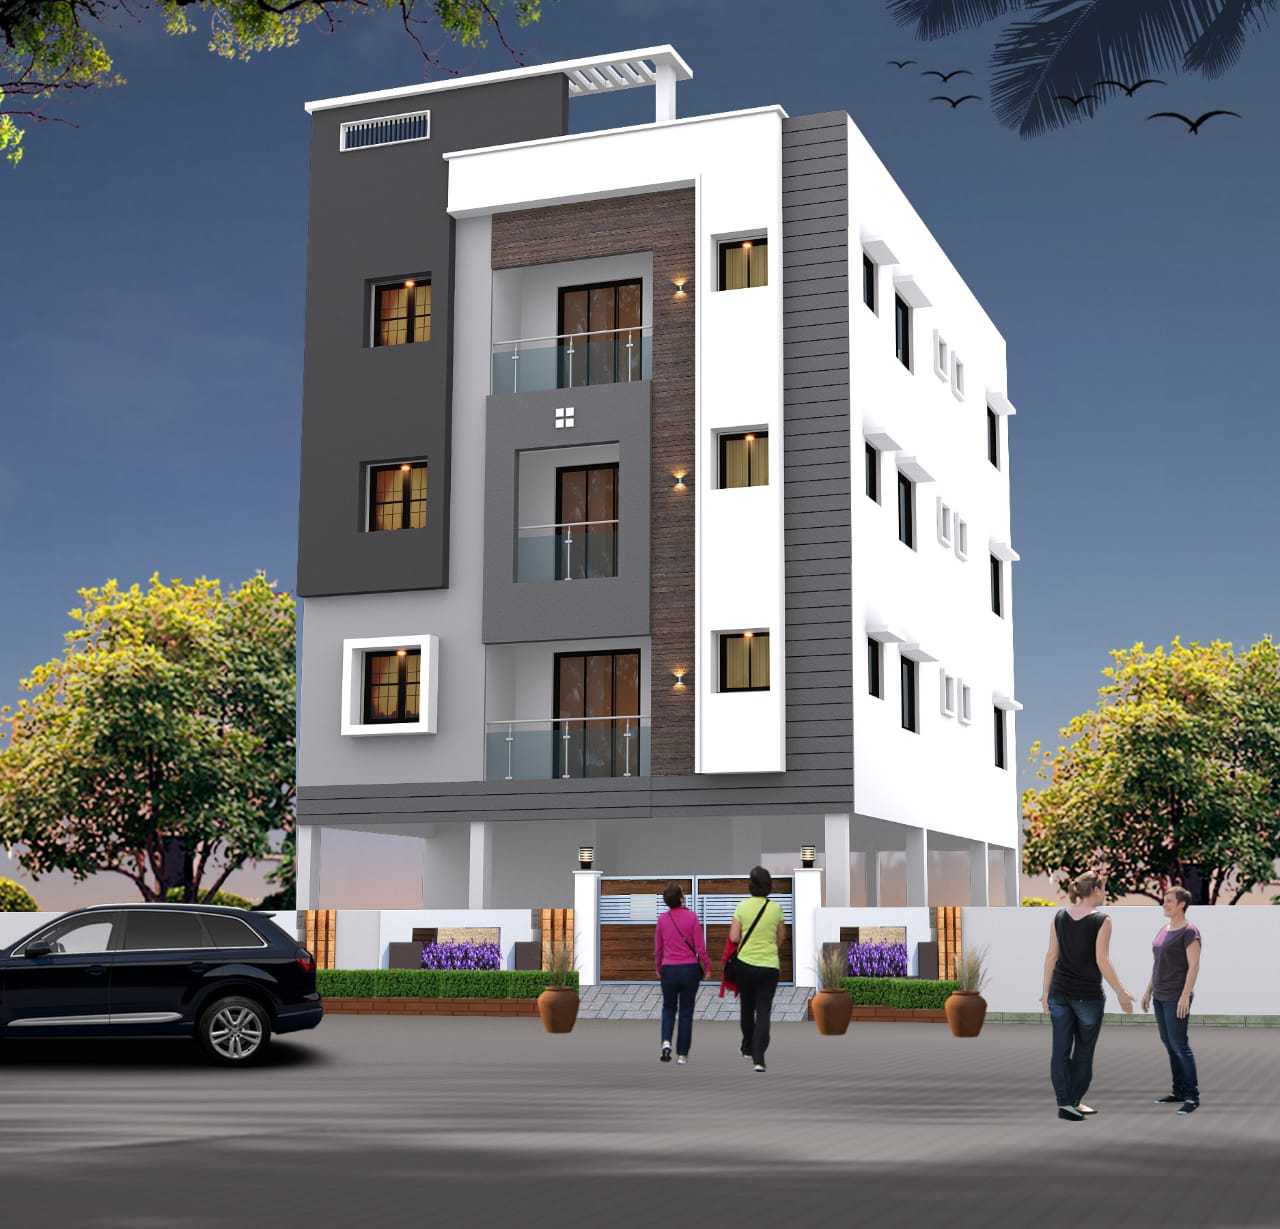 Madhav Associates - Ongoing Project